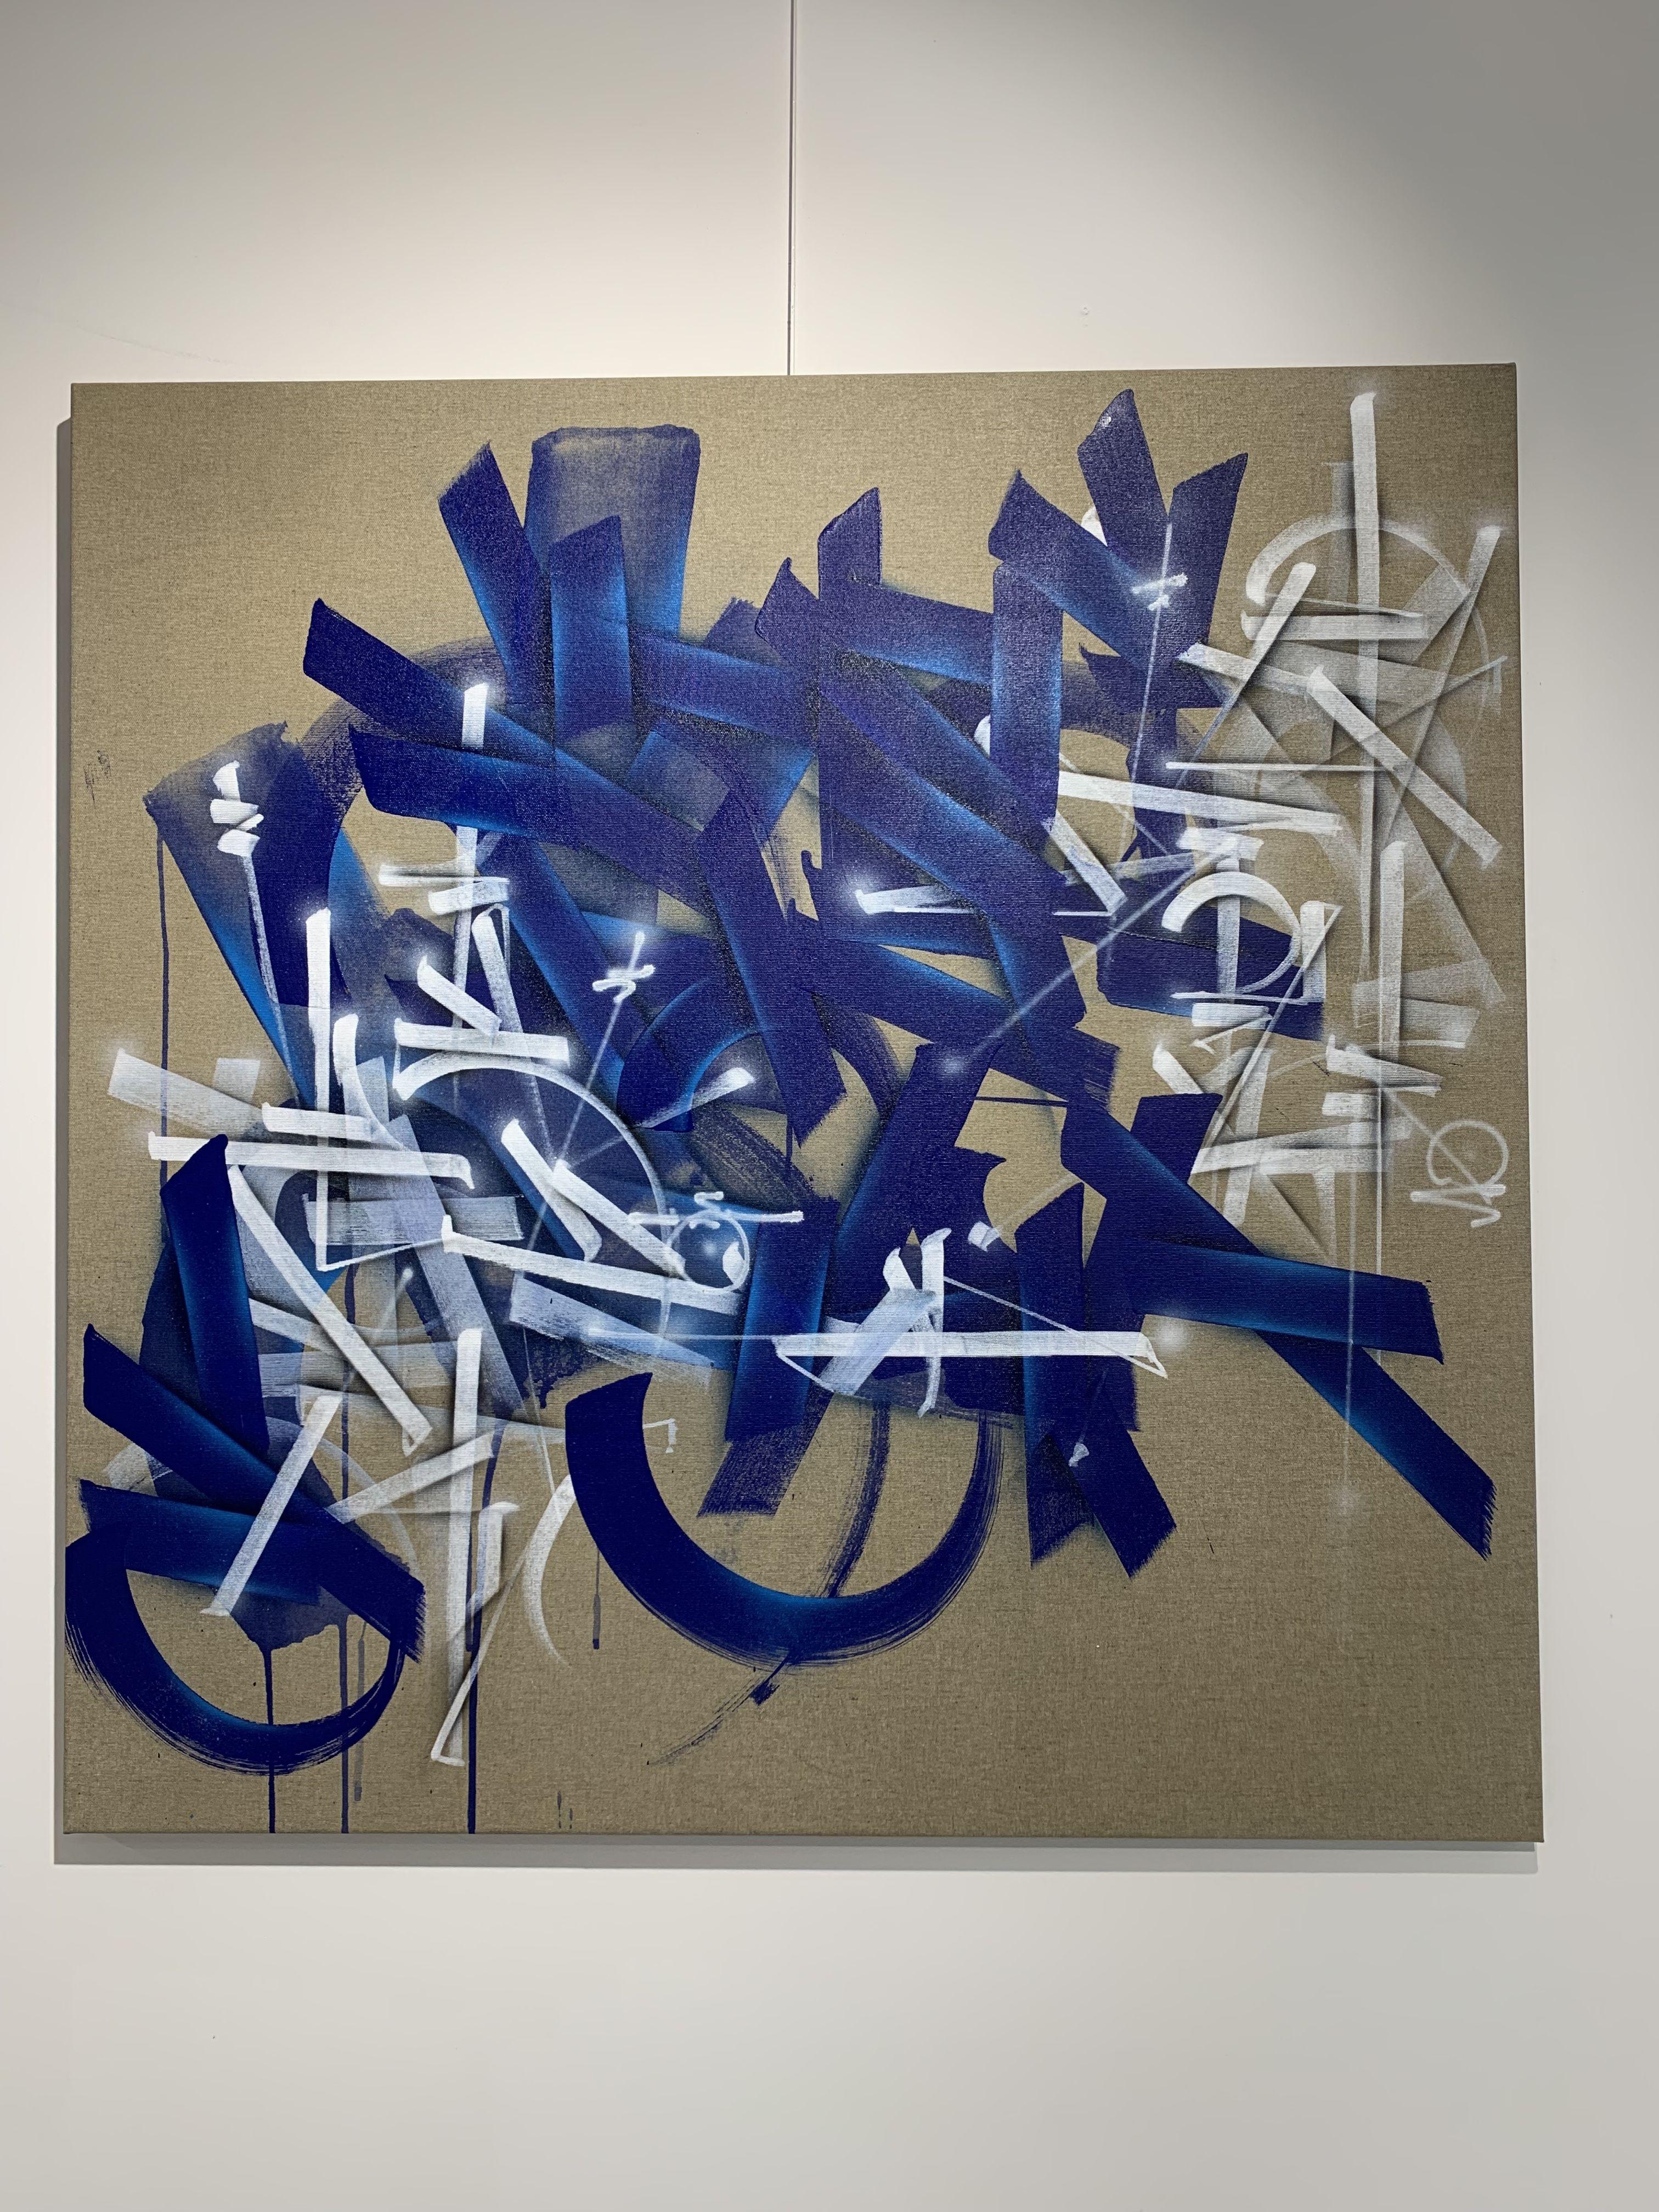 DMVT 0105, Abstract and Calligraphic art by French Street Artist SOKLAK - Painting by Soklak